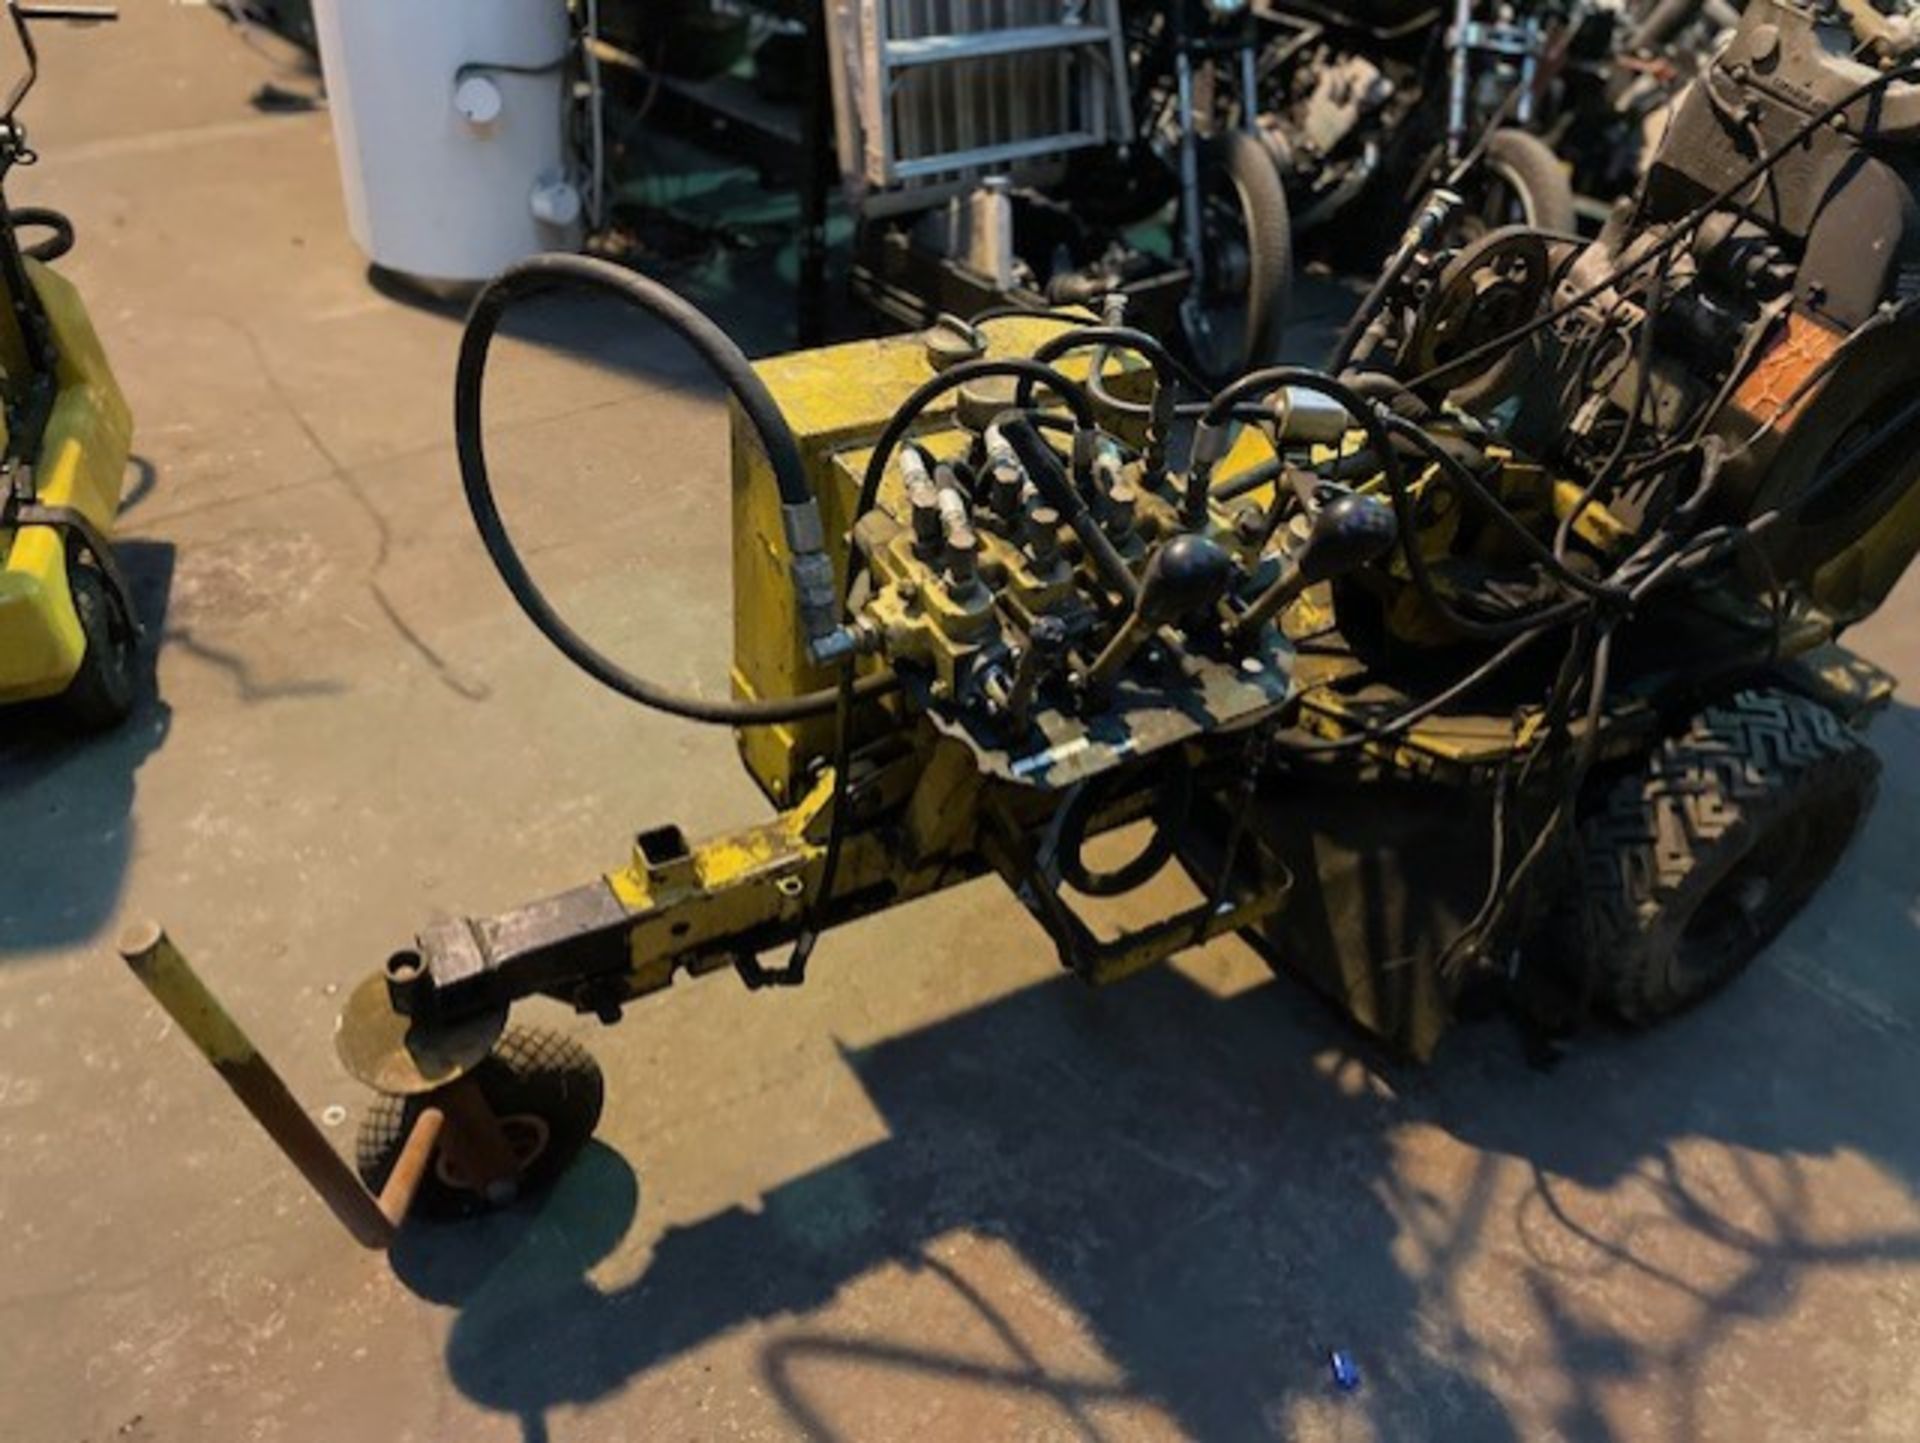 Stump grinder rayco 1620 with a diesel engine al together from belts to frame rare machine locking - Image 6 of 6